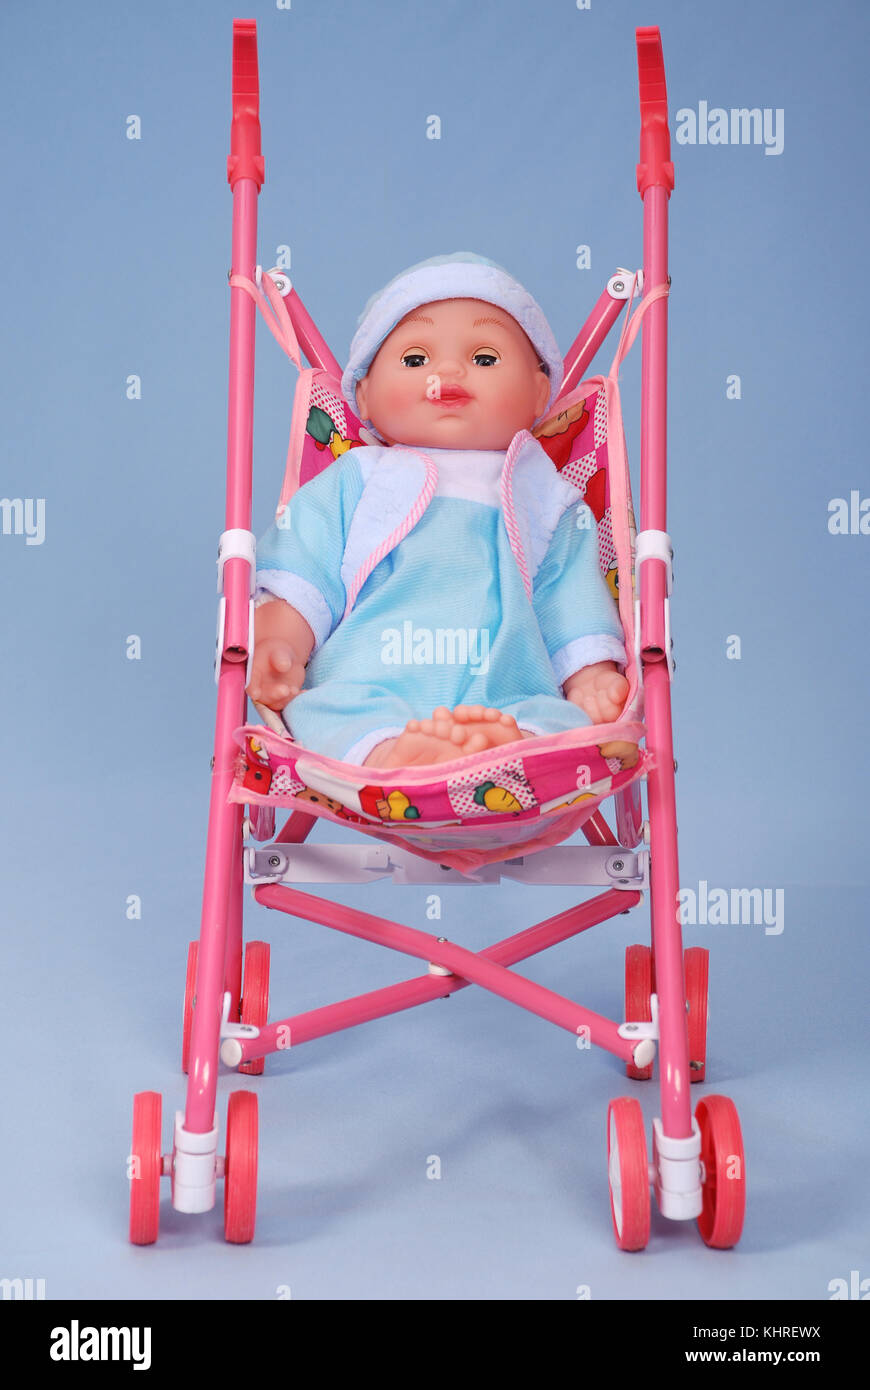 Toy baby buggy on blue background. On a carriage the doll lays. Stock Photo